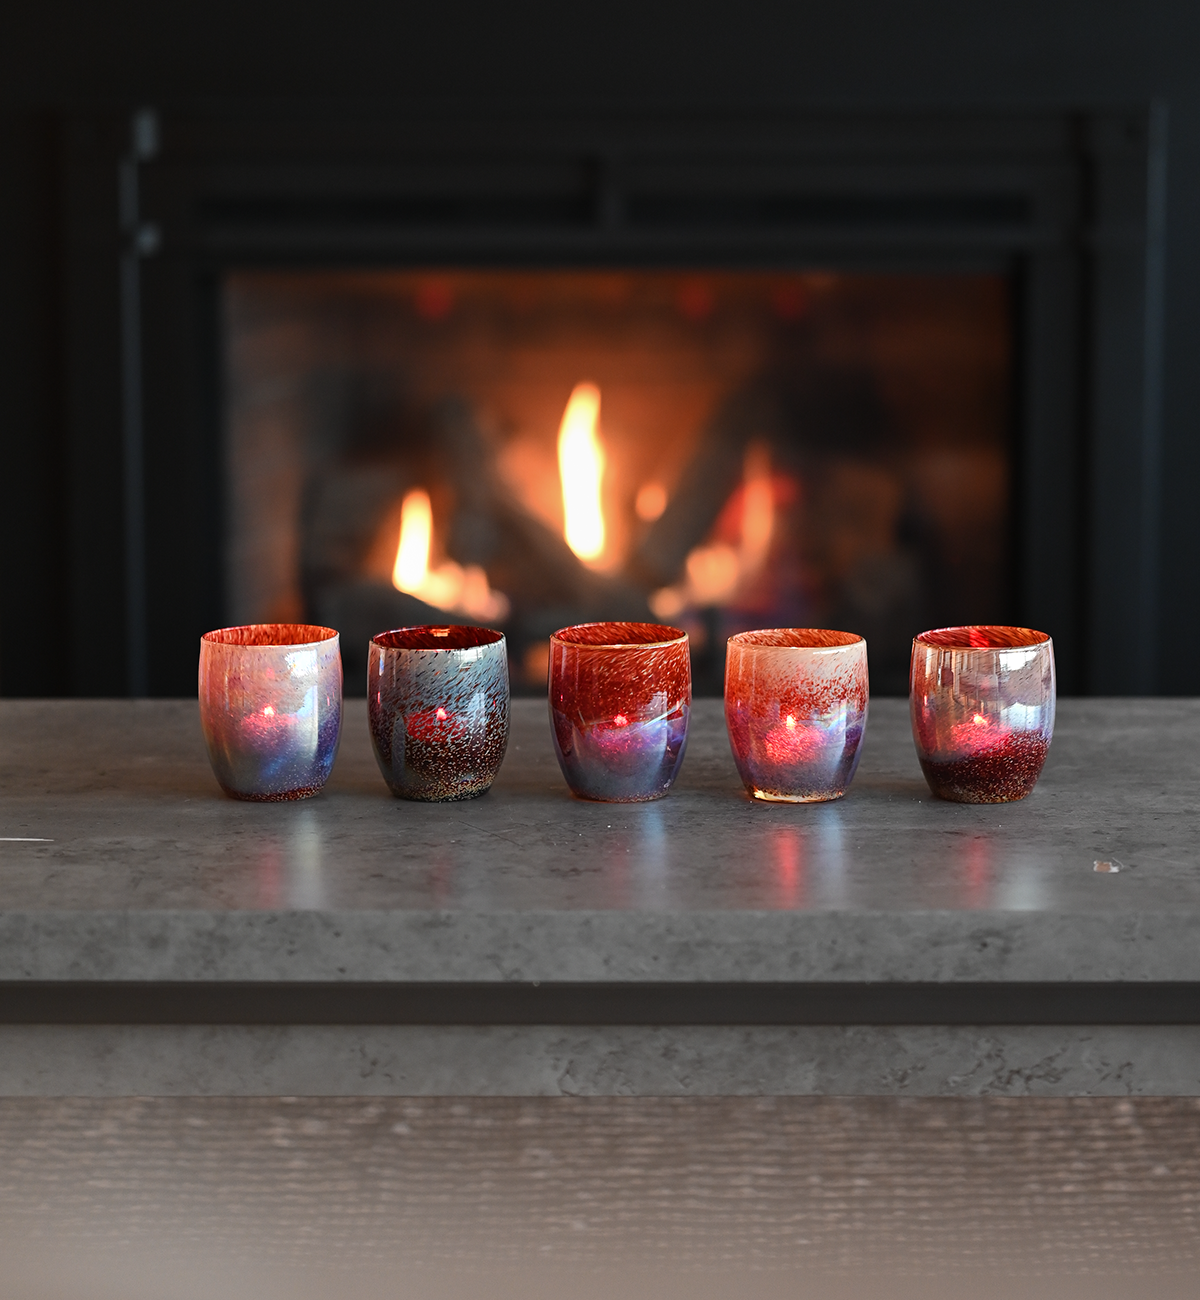 campfire is a textured brown and red hand-blown glass candle holder.